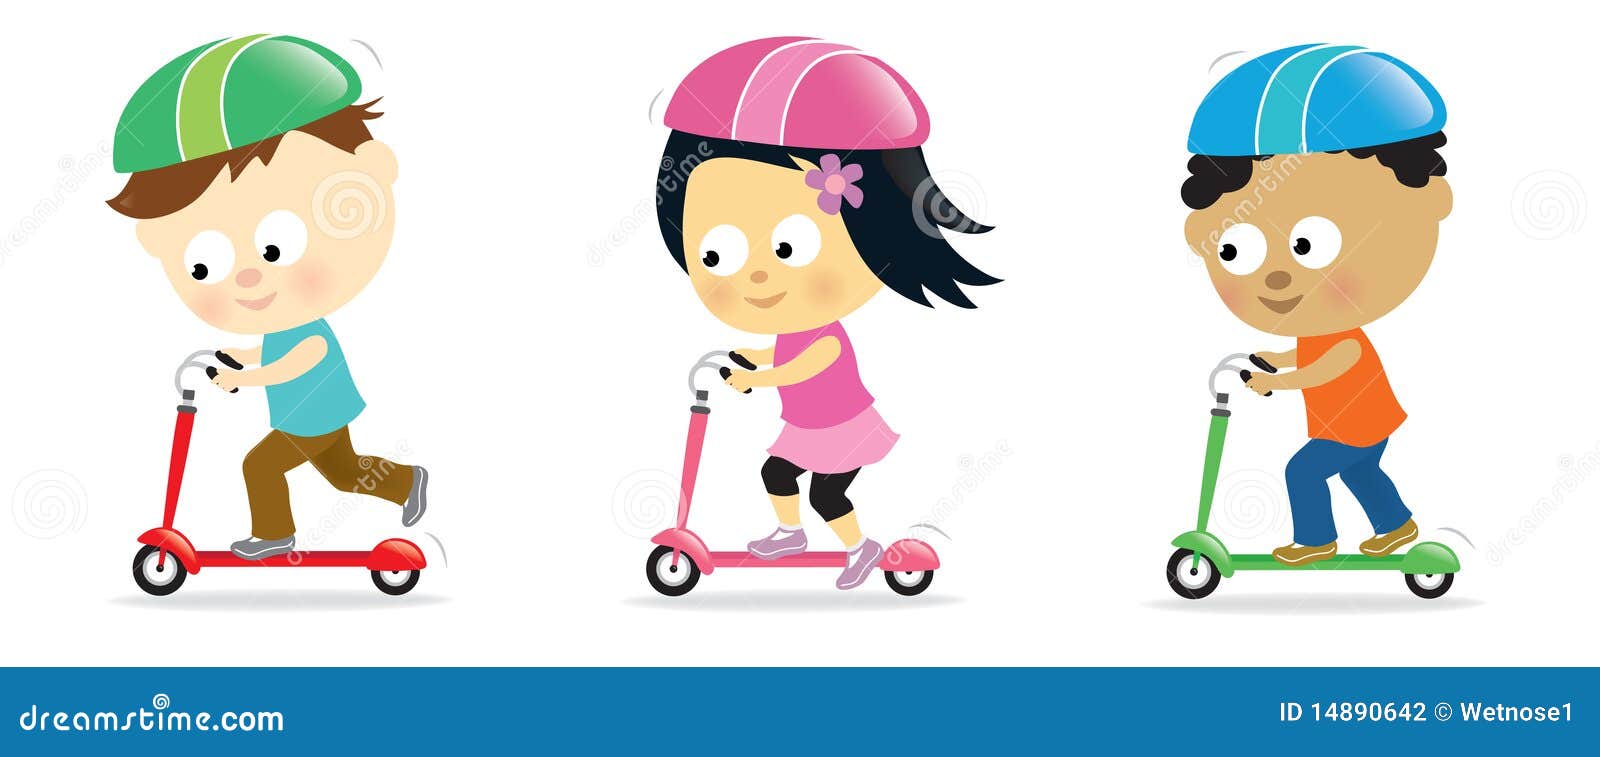 childrens ride on scooters